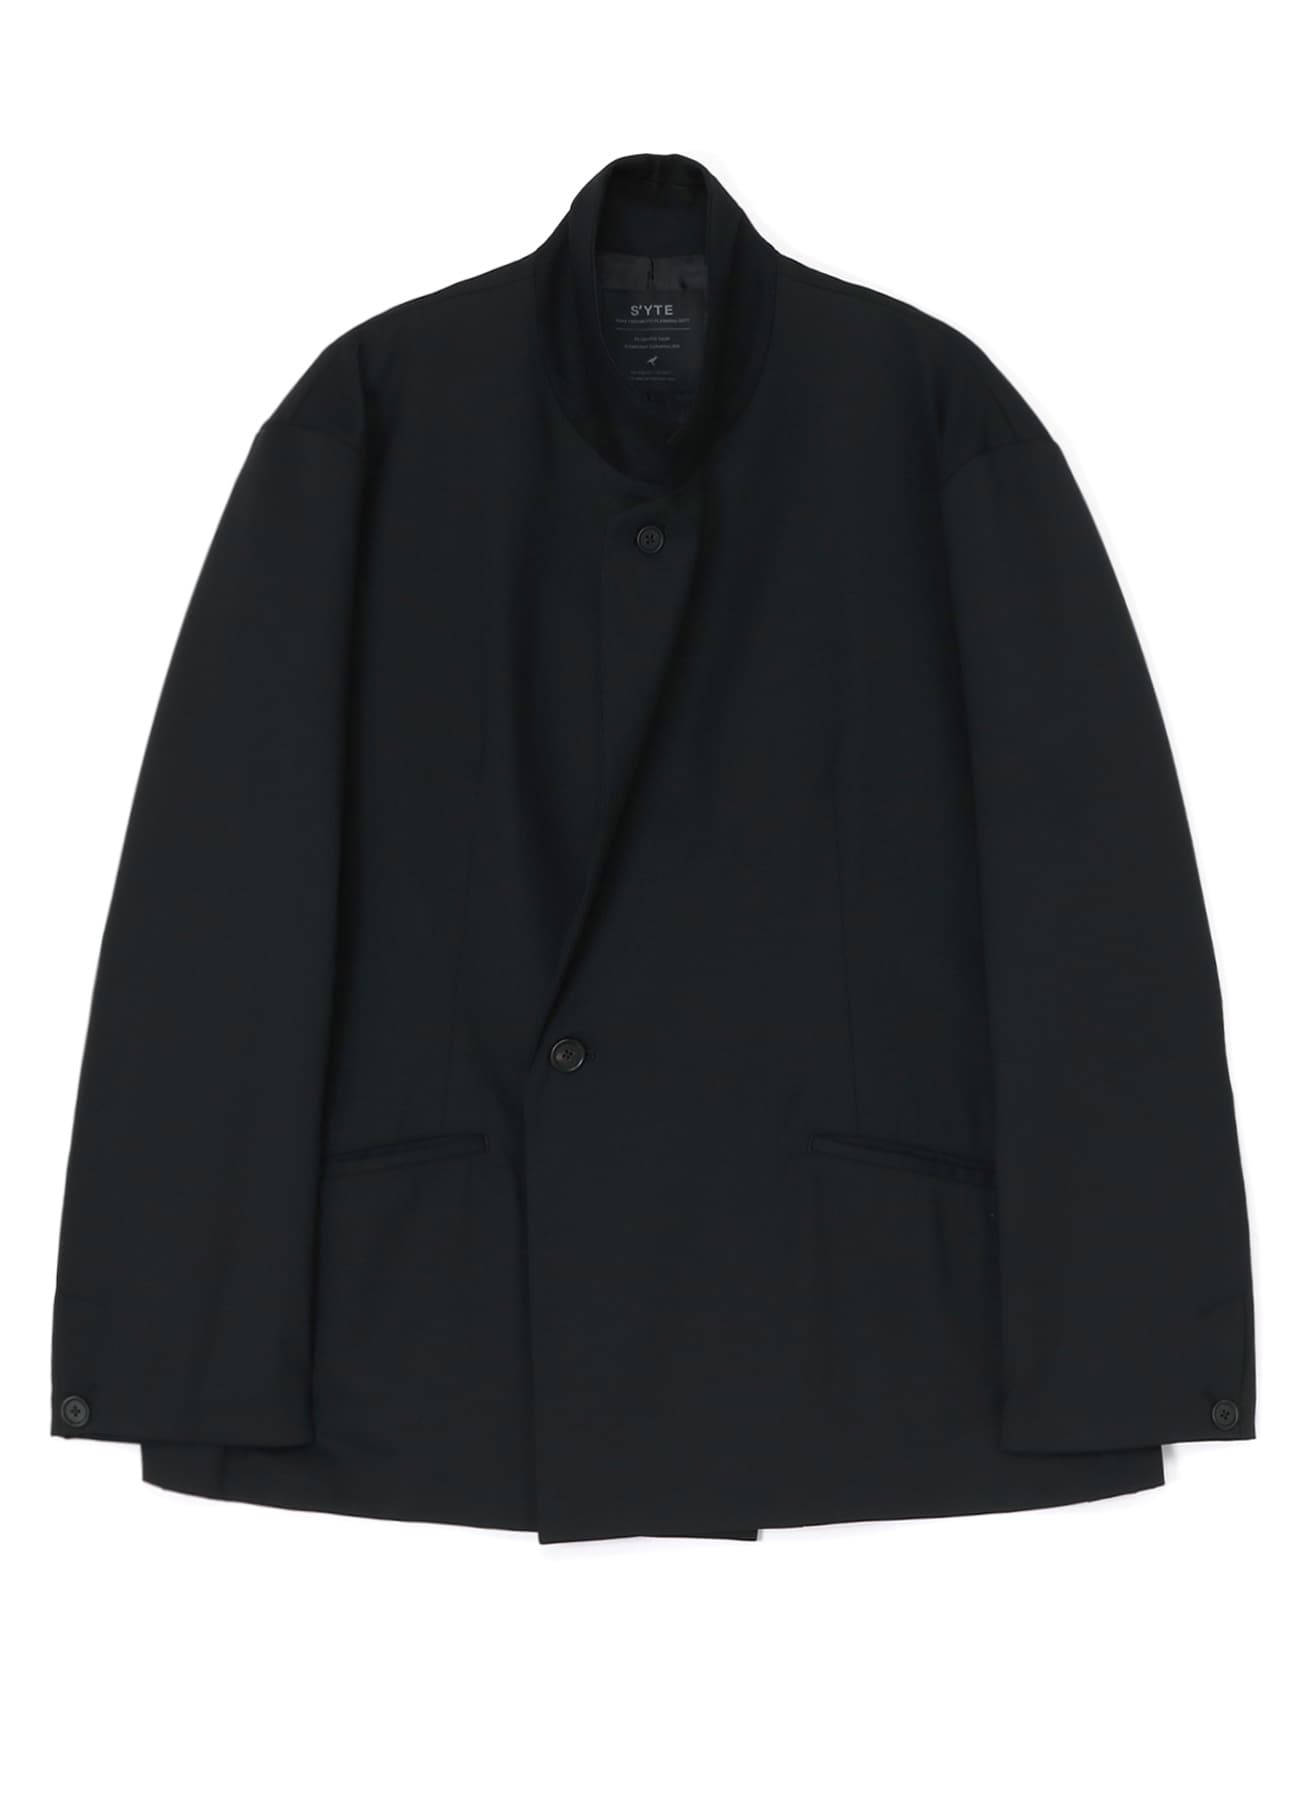 T/W GABARDINE DOUBLE-BREASTED JACKET WITH IRREGULAR BUTTONING